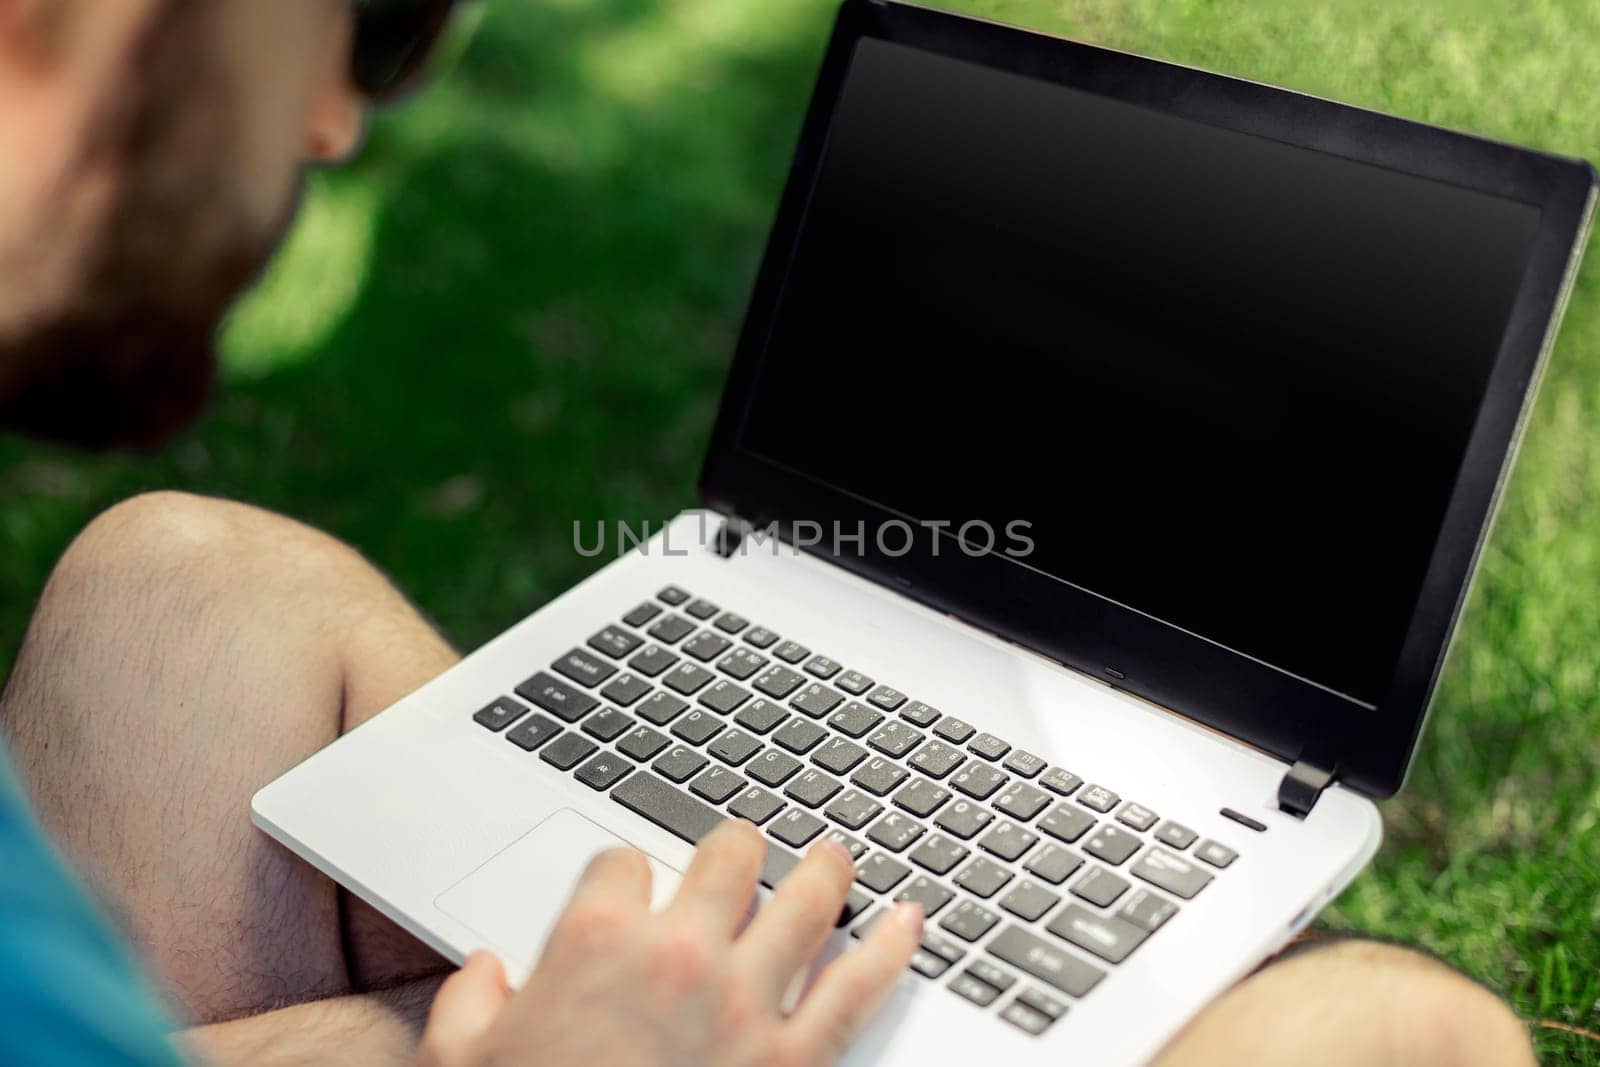 Top view male hands using notebook outdoors in urban setting while typing on keyboard, businessman freelancer working on computer. by nazarovsergey